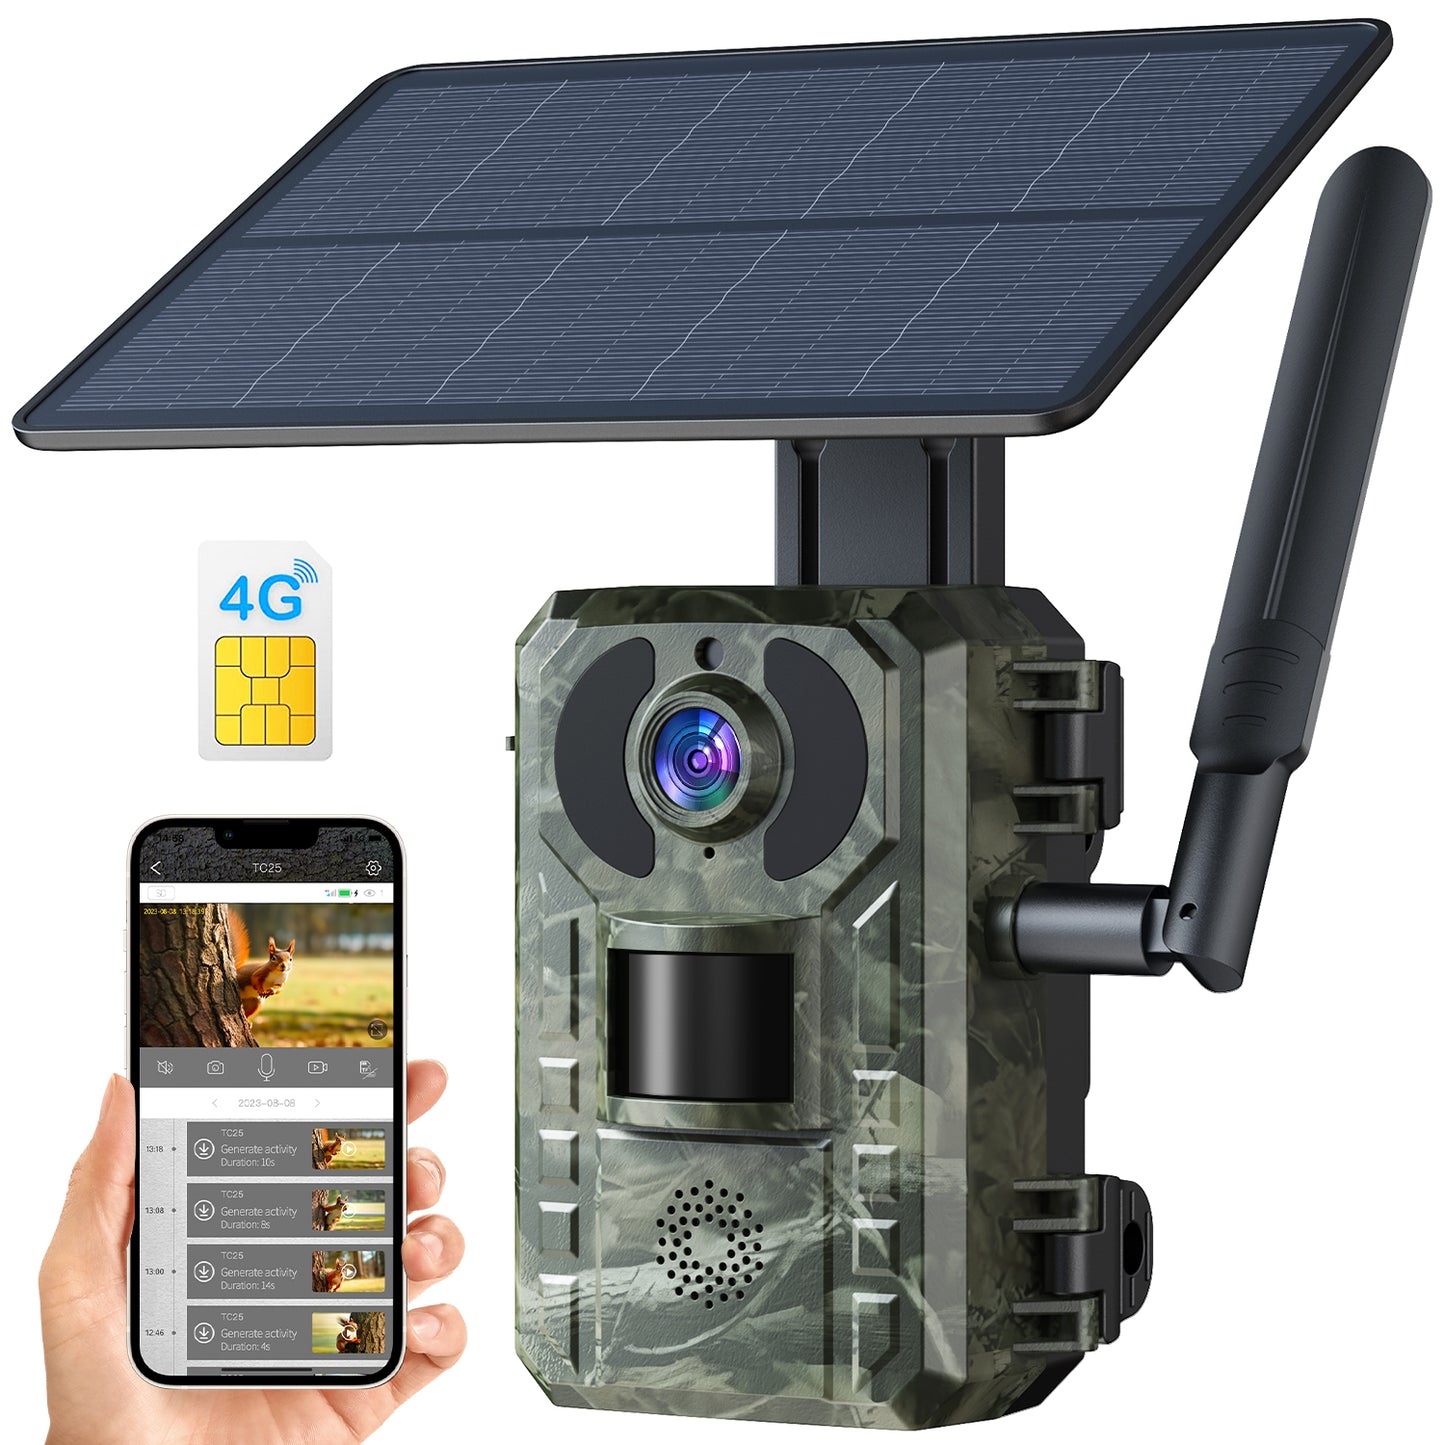 CAMPARK 4G Cellular Trail Camera Solar Powered, 2.5K 14MP Hunting Game Camera with Live View and Motion Alerts, 940nm No Glow Night Vision and IP66 Waterproof for Wildlife Monitoring